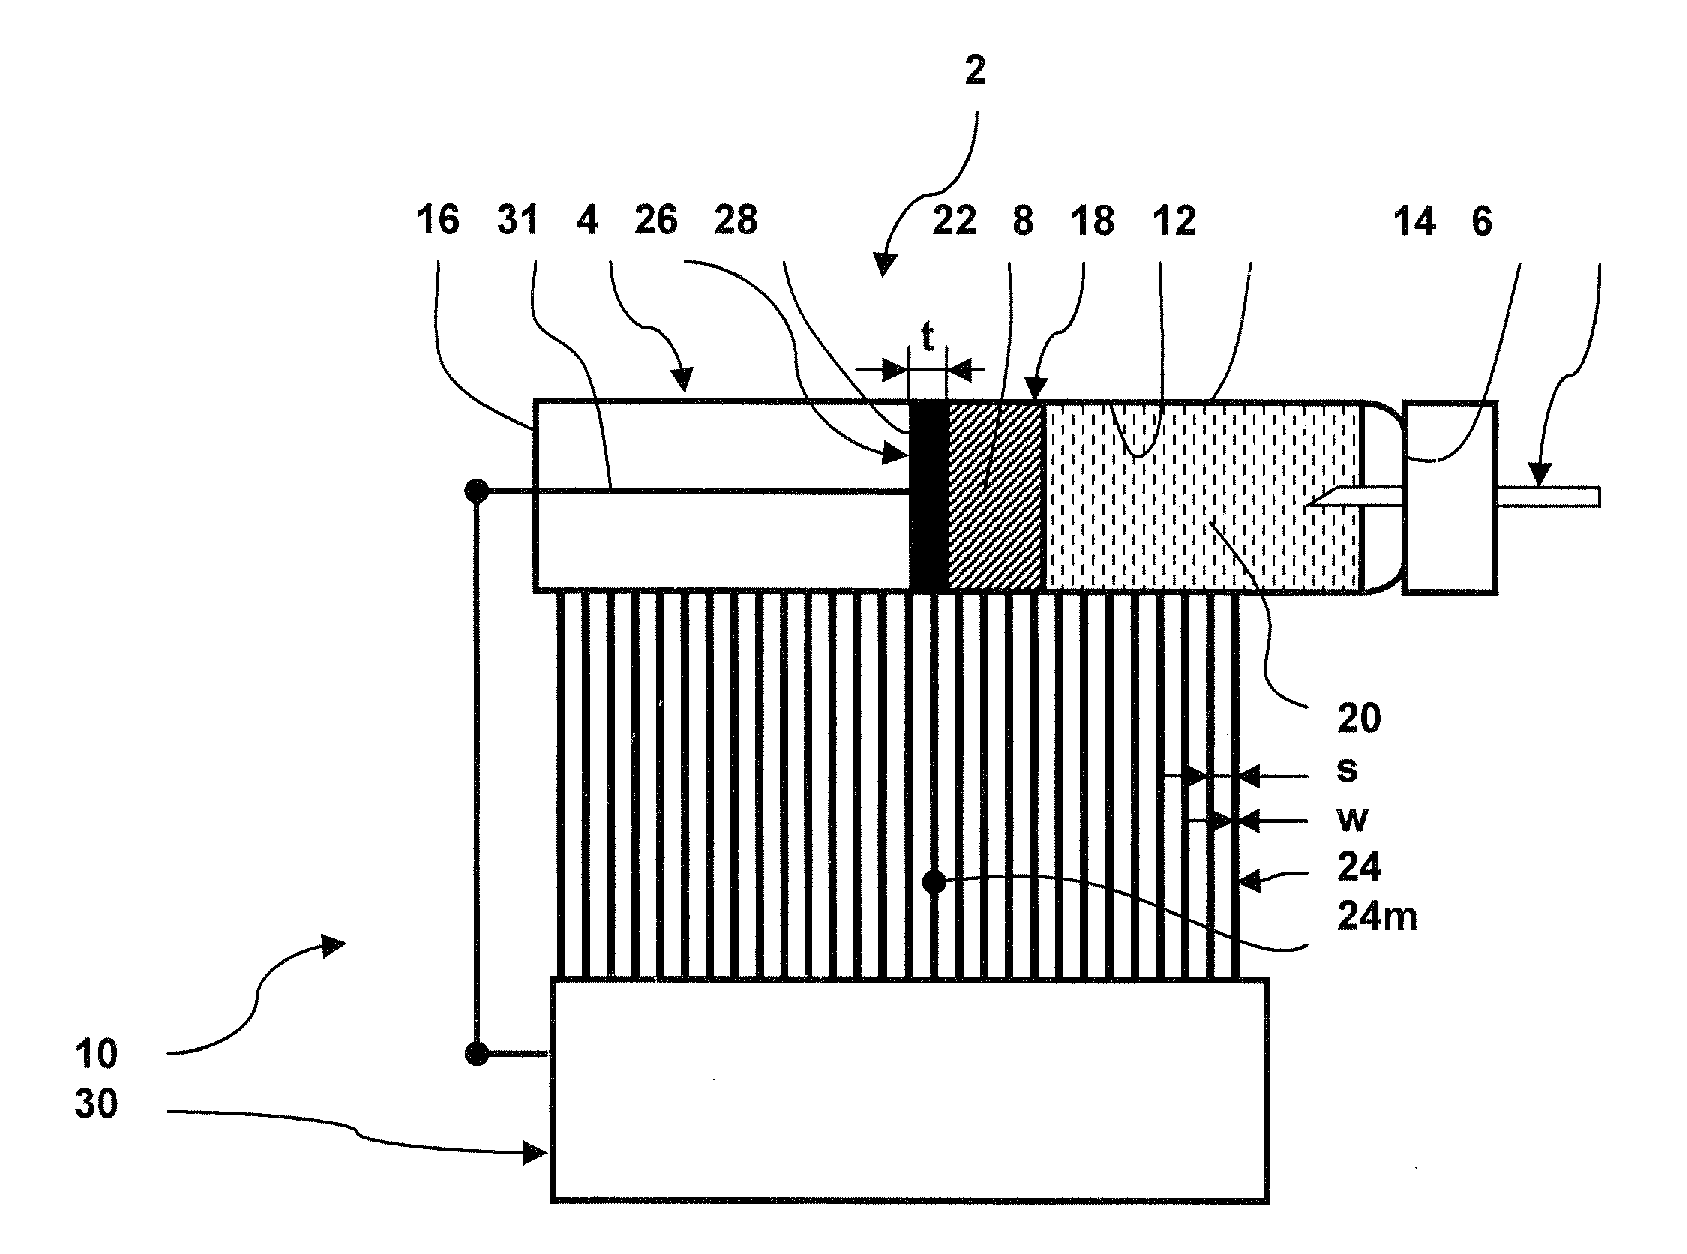 Cartridge with fill level detection